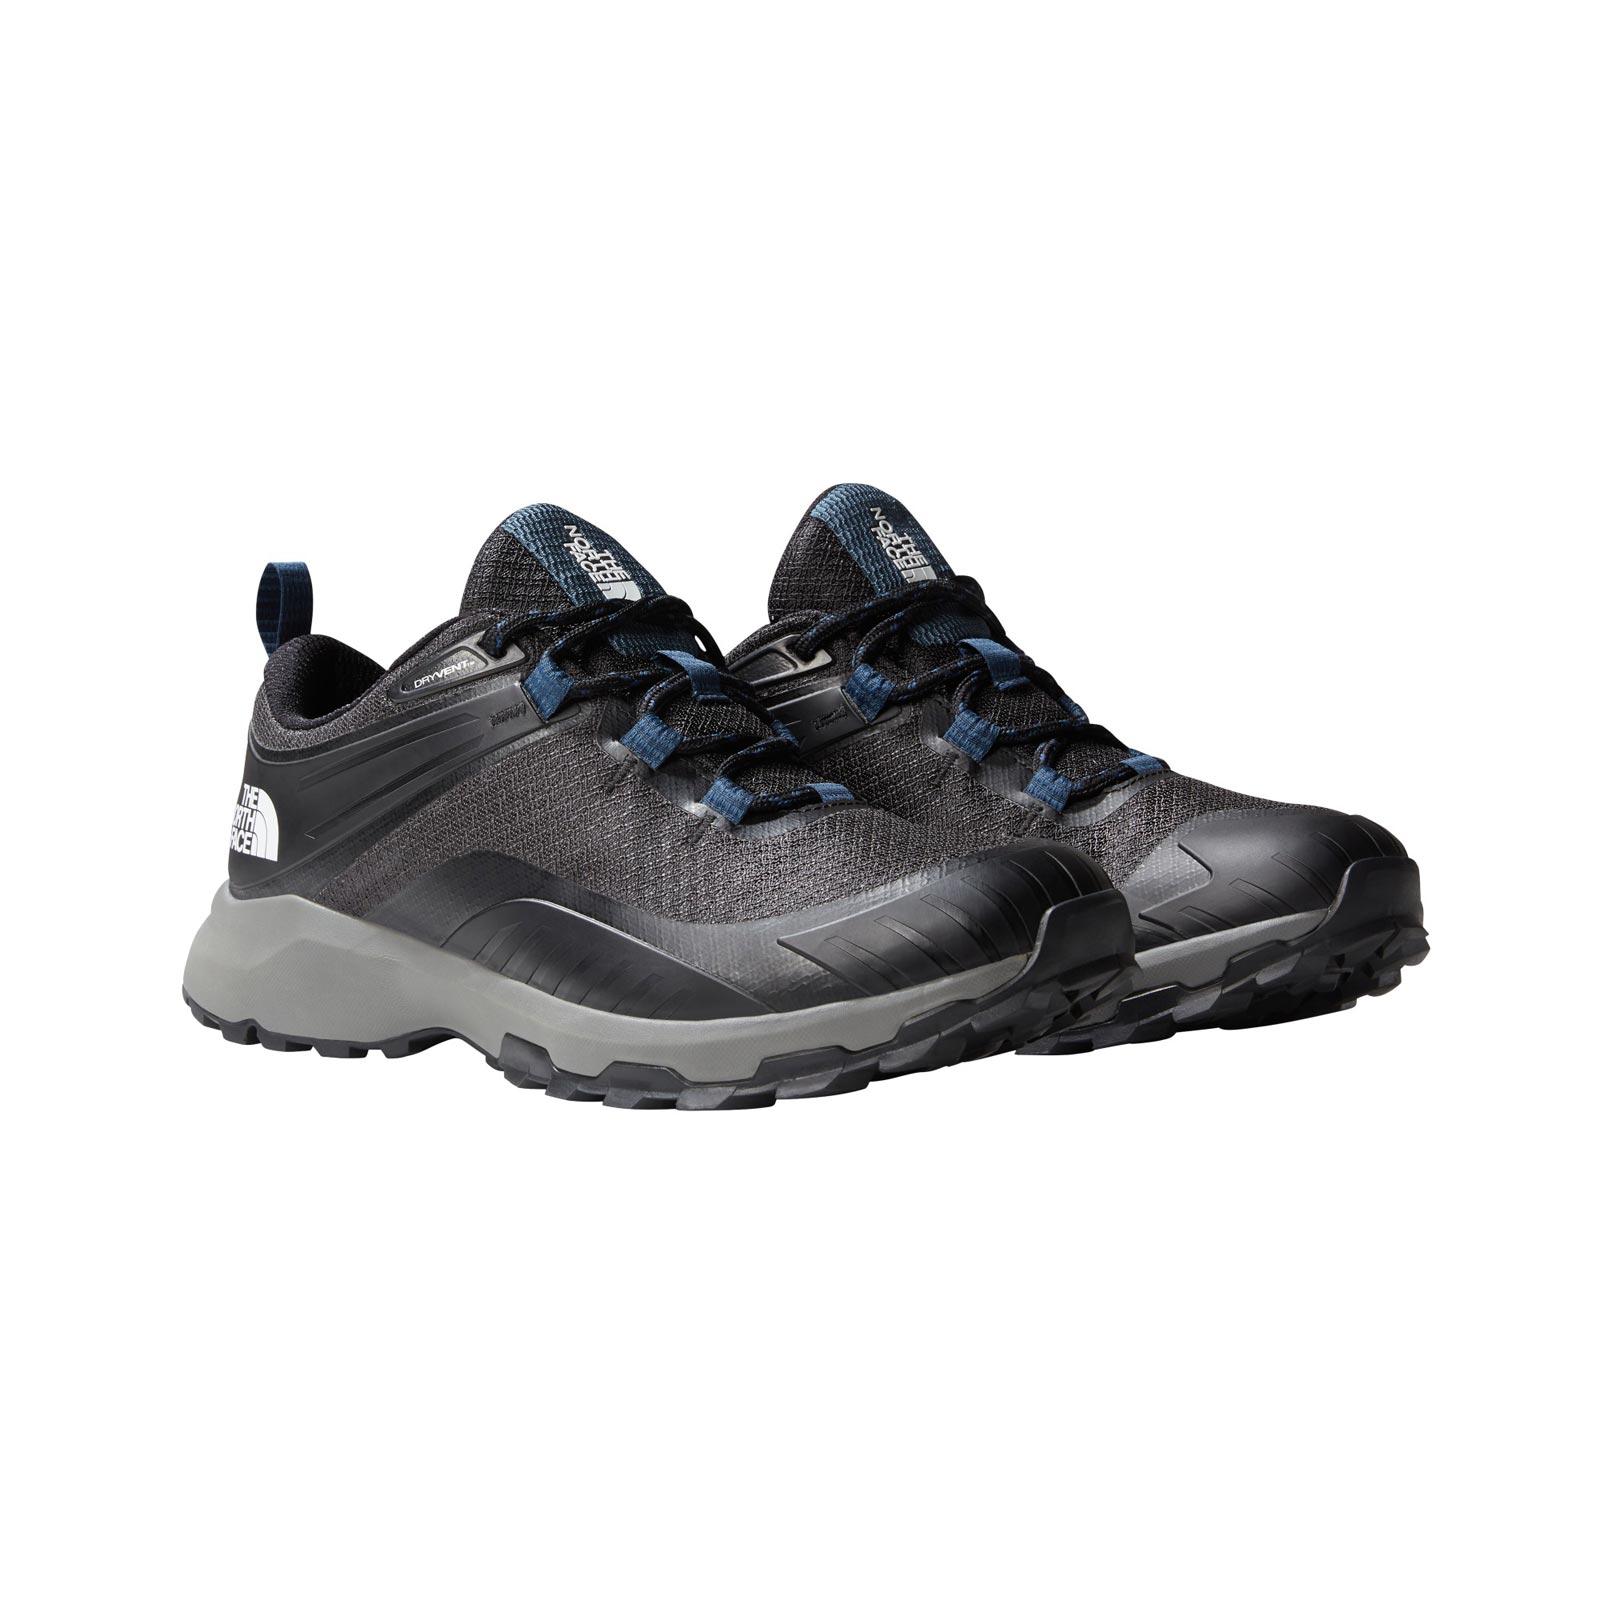 THE NORTH FACE CRAGMONT MENS WATERPROOF SHOES